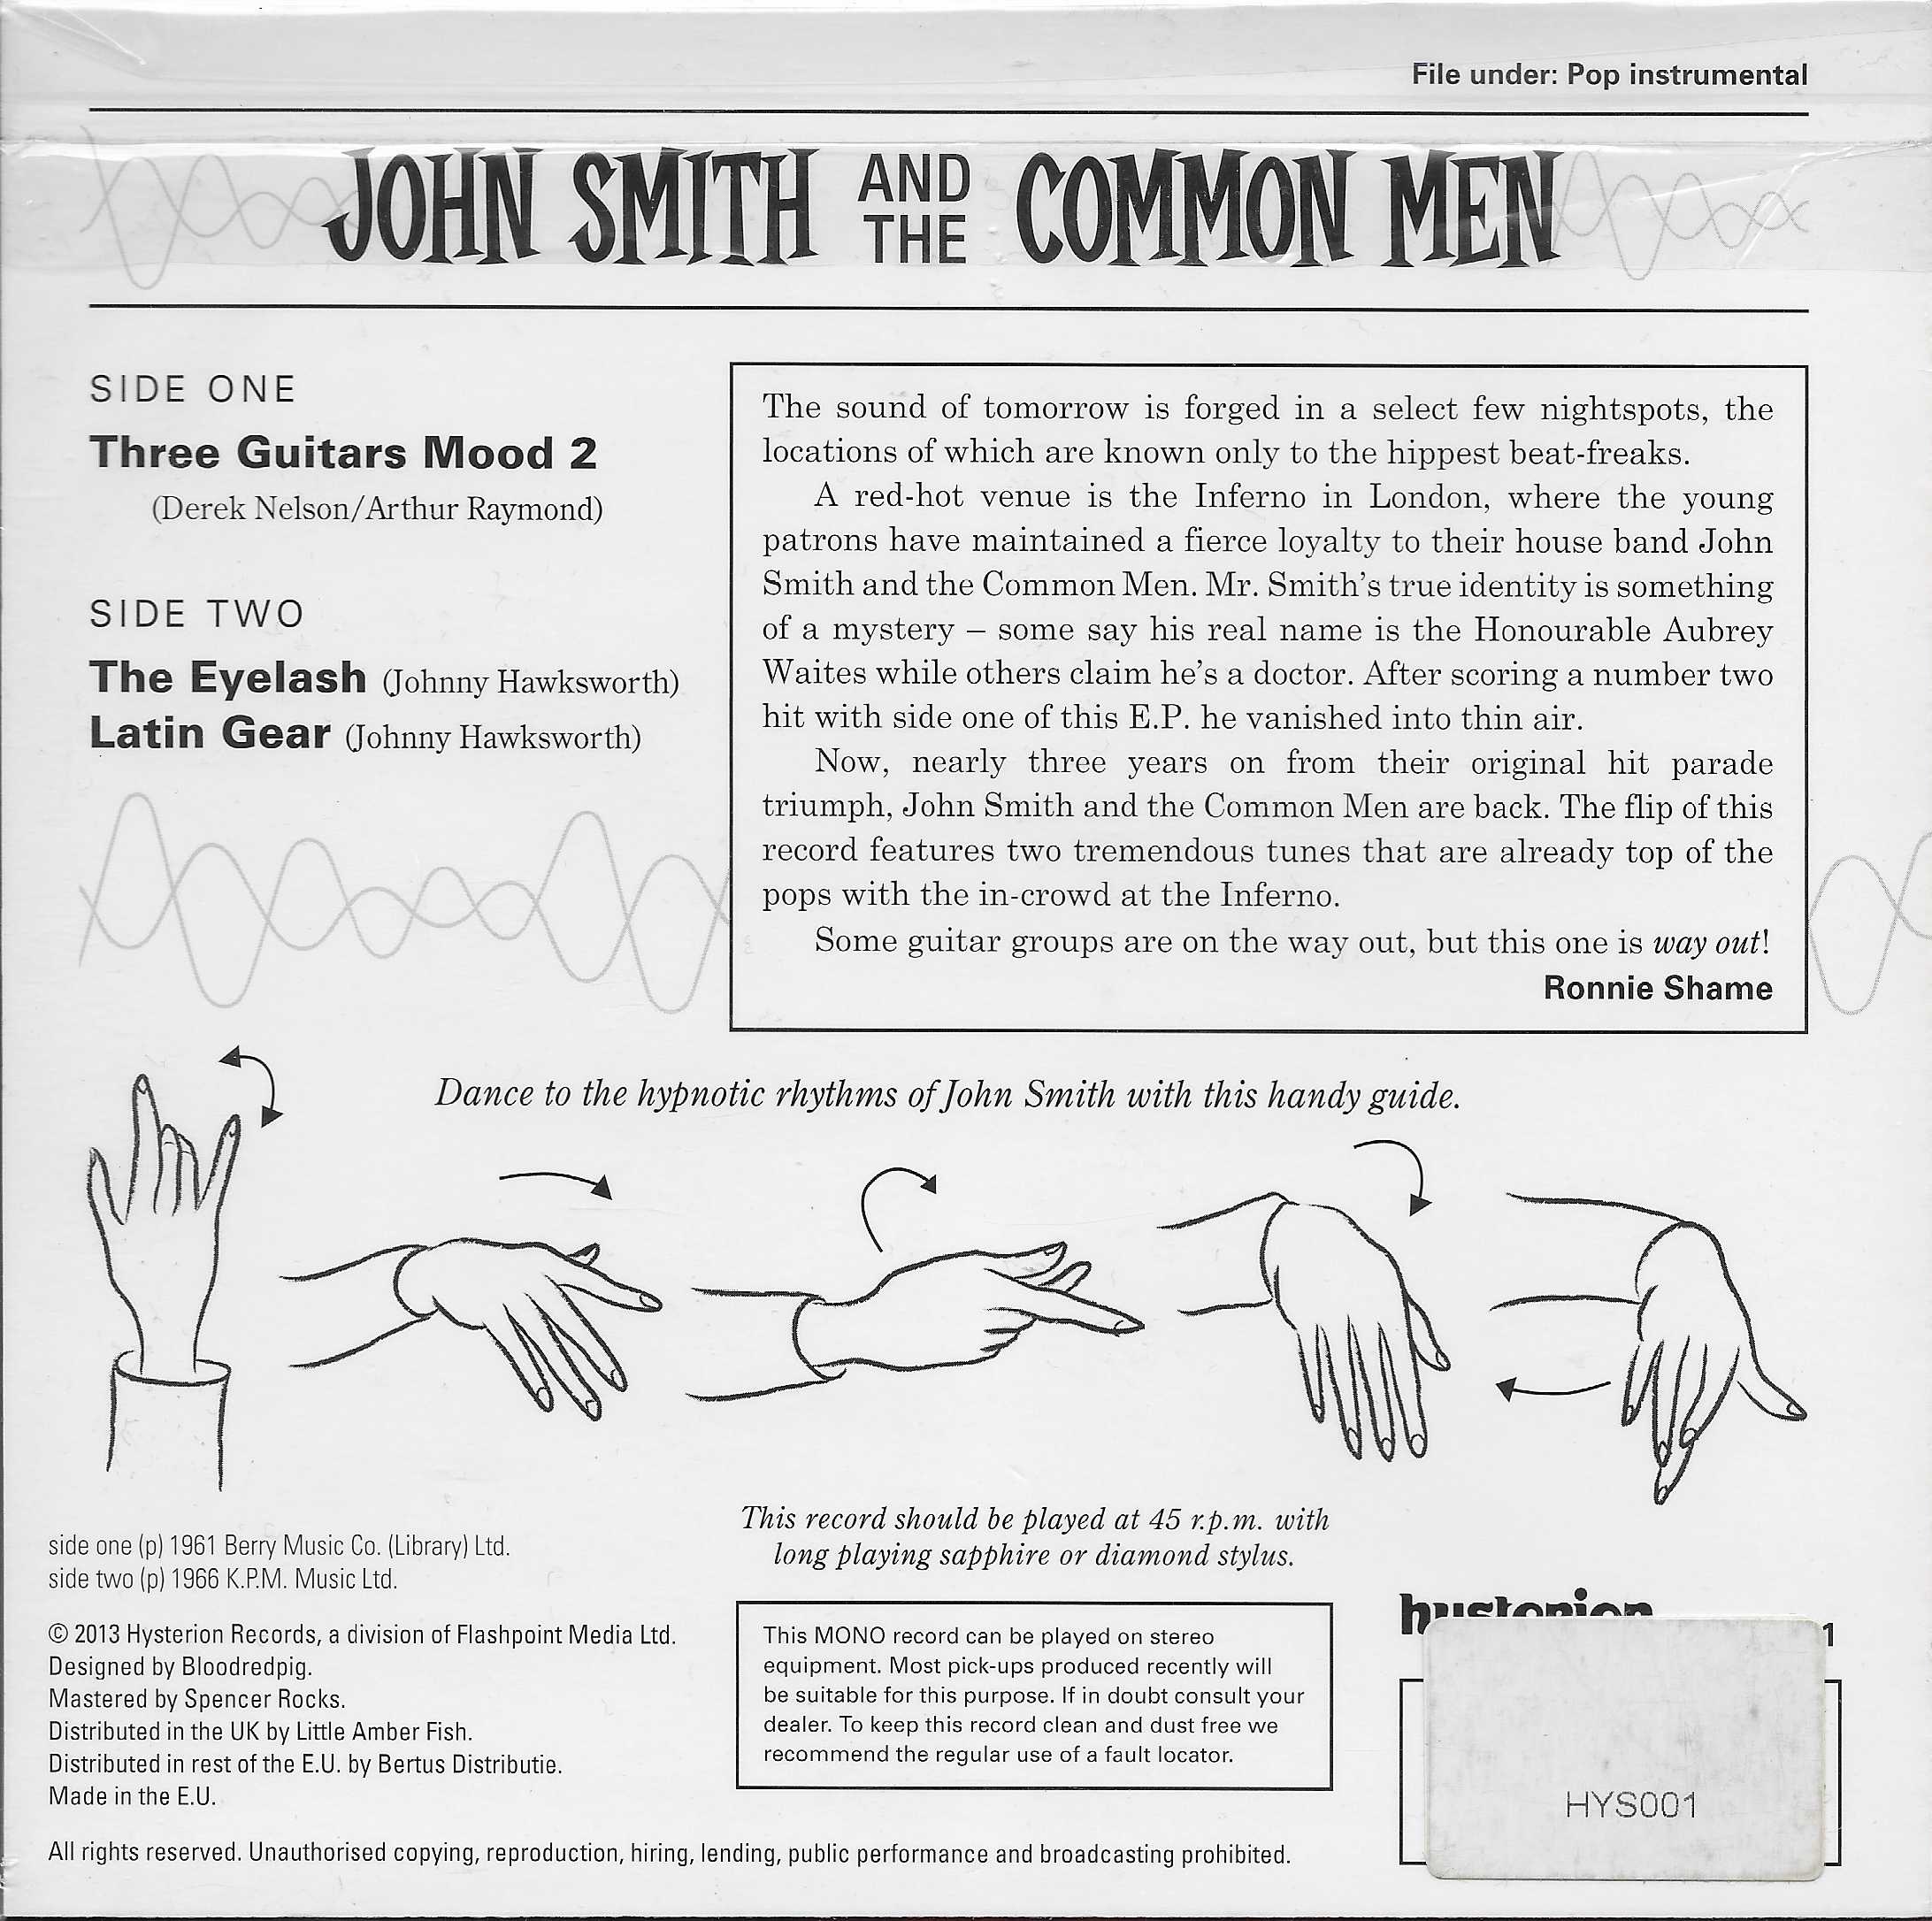 Picture of HYS 001 Sounds from the inferno - Record Store Day 2013 by artist John Smith and the Common Men from the BBC records and Tapes library